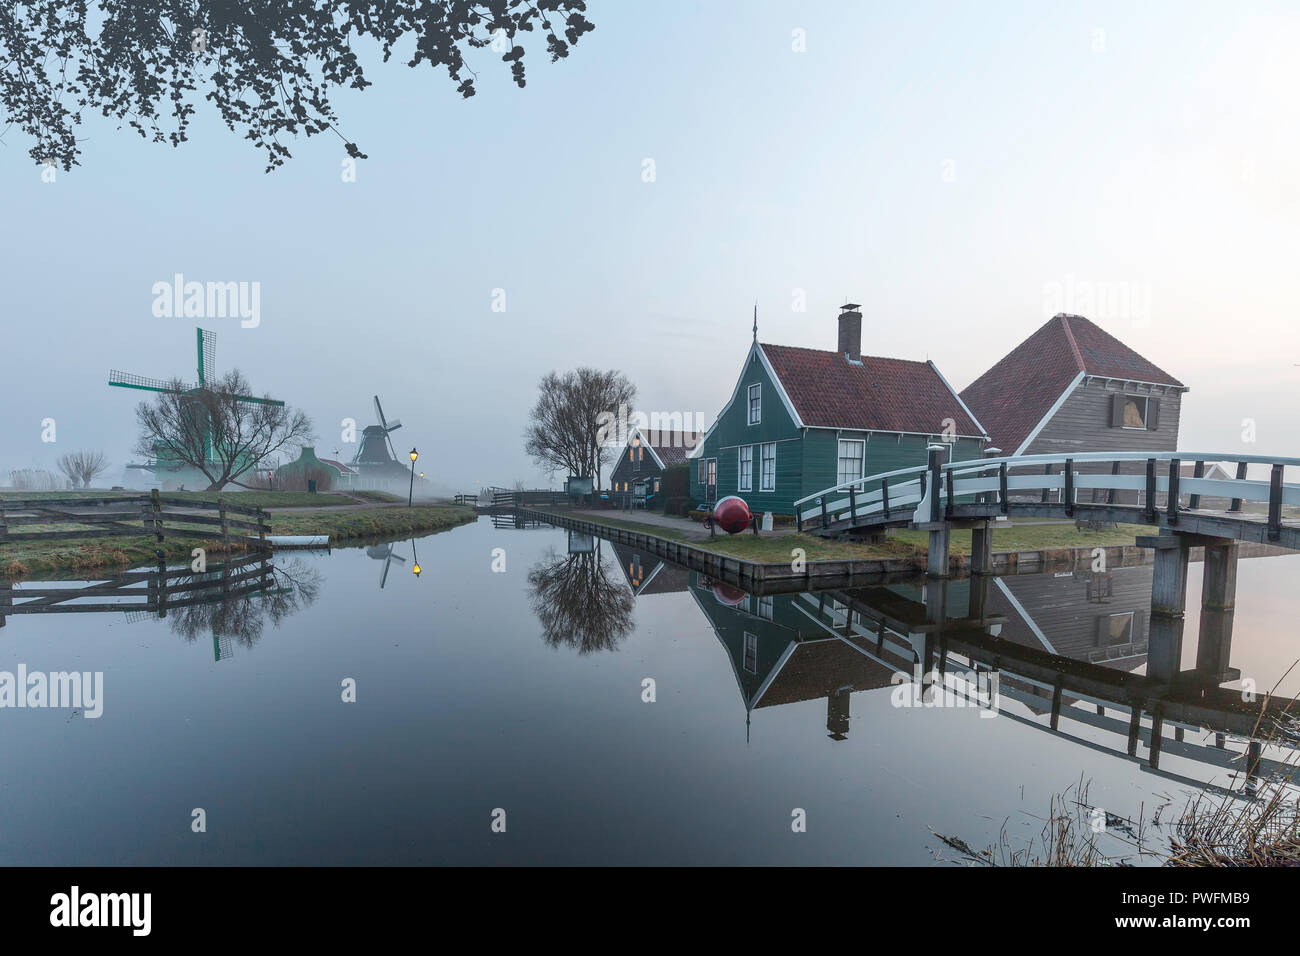 Beaucoutif typical Dutch wooden houses architecture mirrored on the calm canal of Zaanse Schans located at the North of Amsterdam, Netherlands Stock Photo